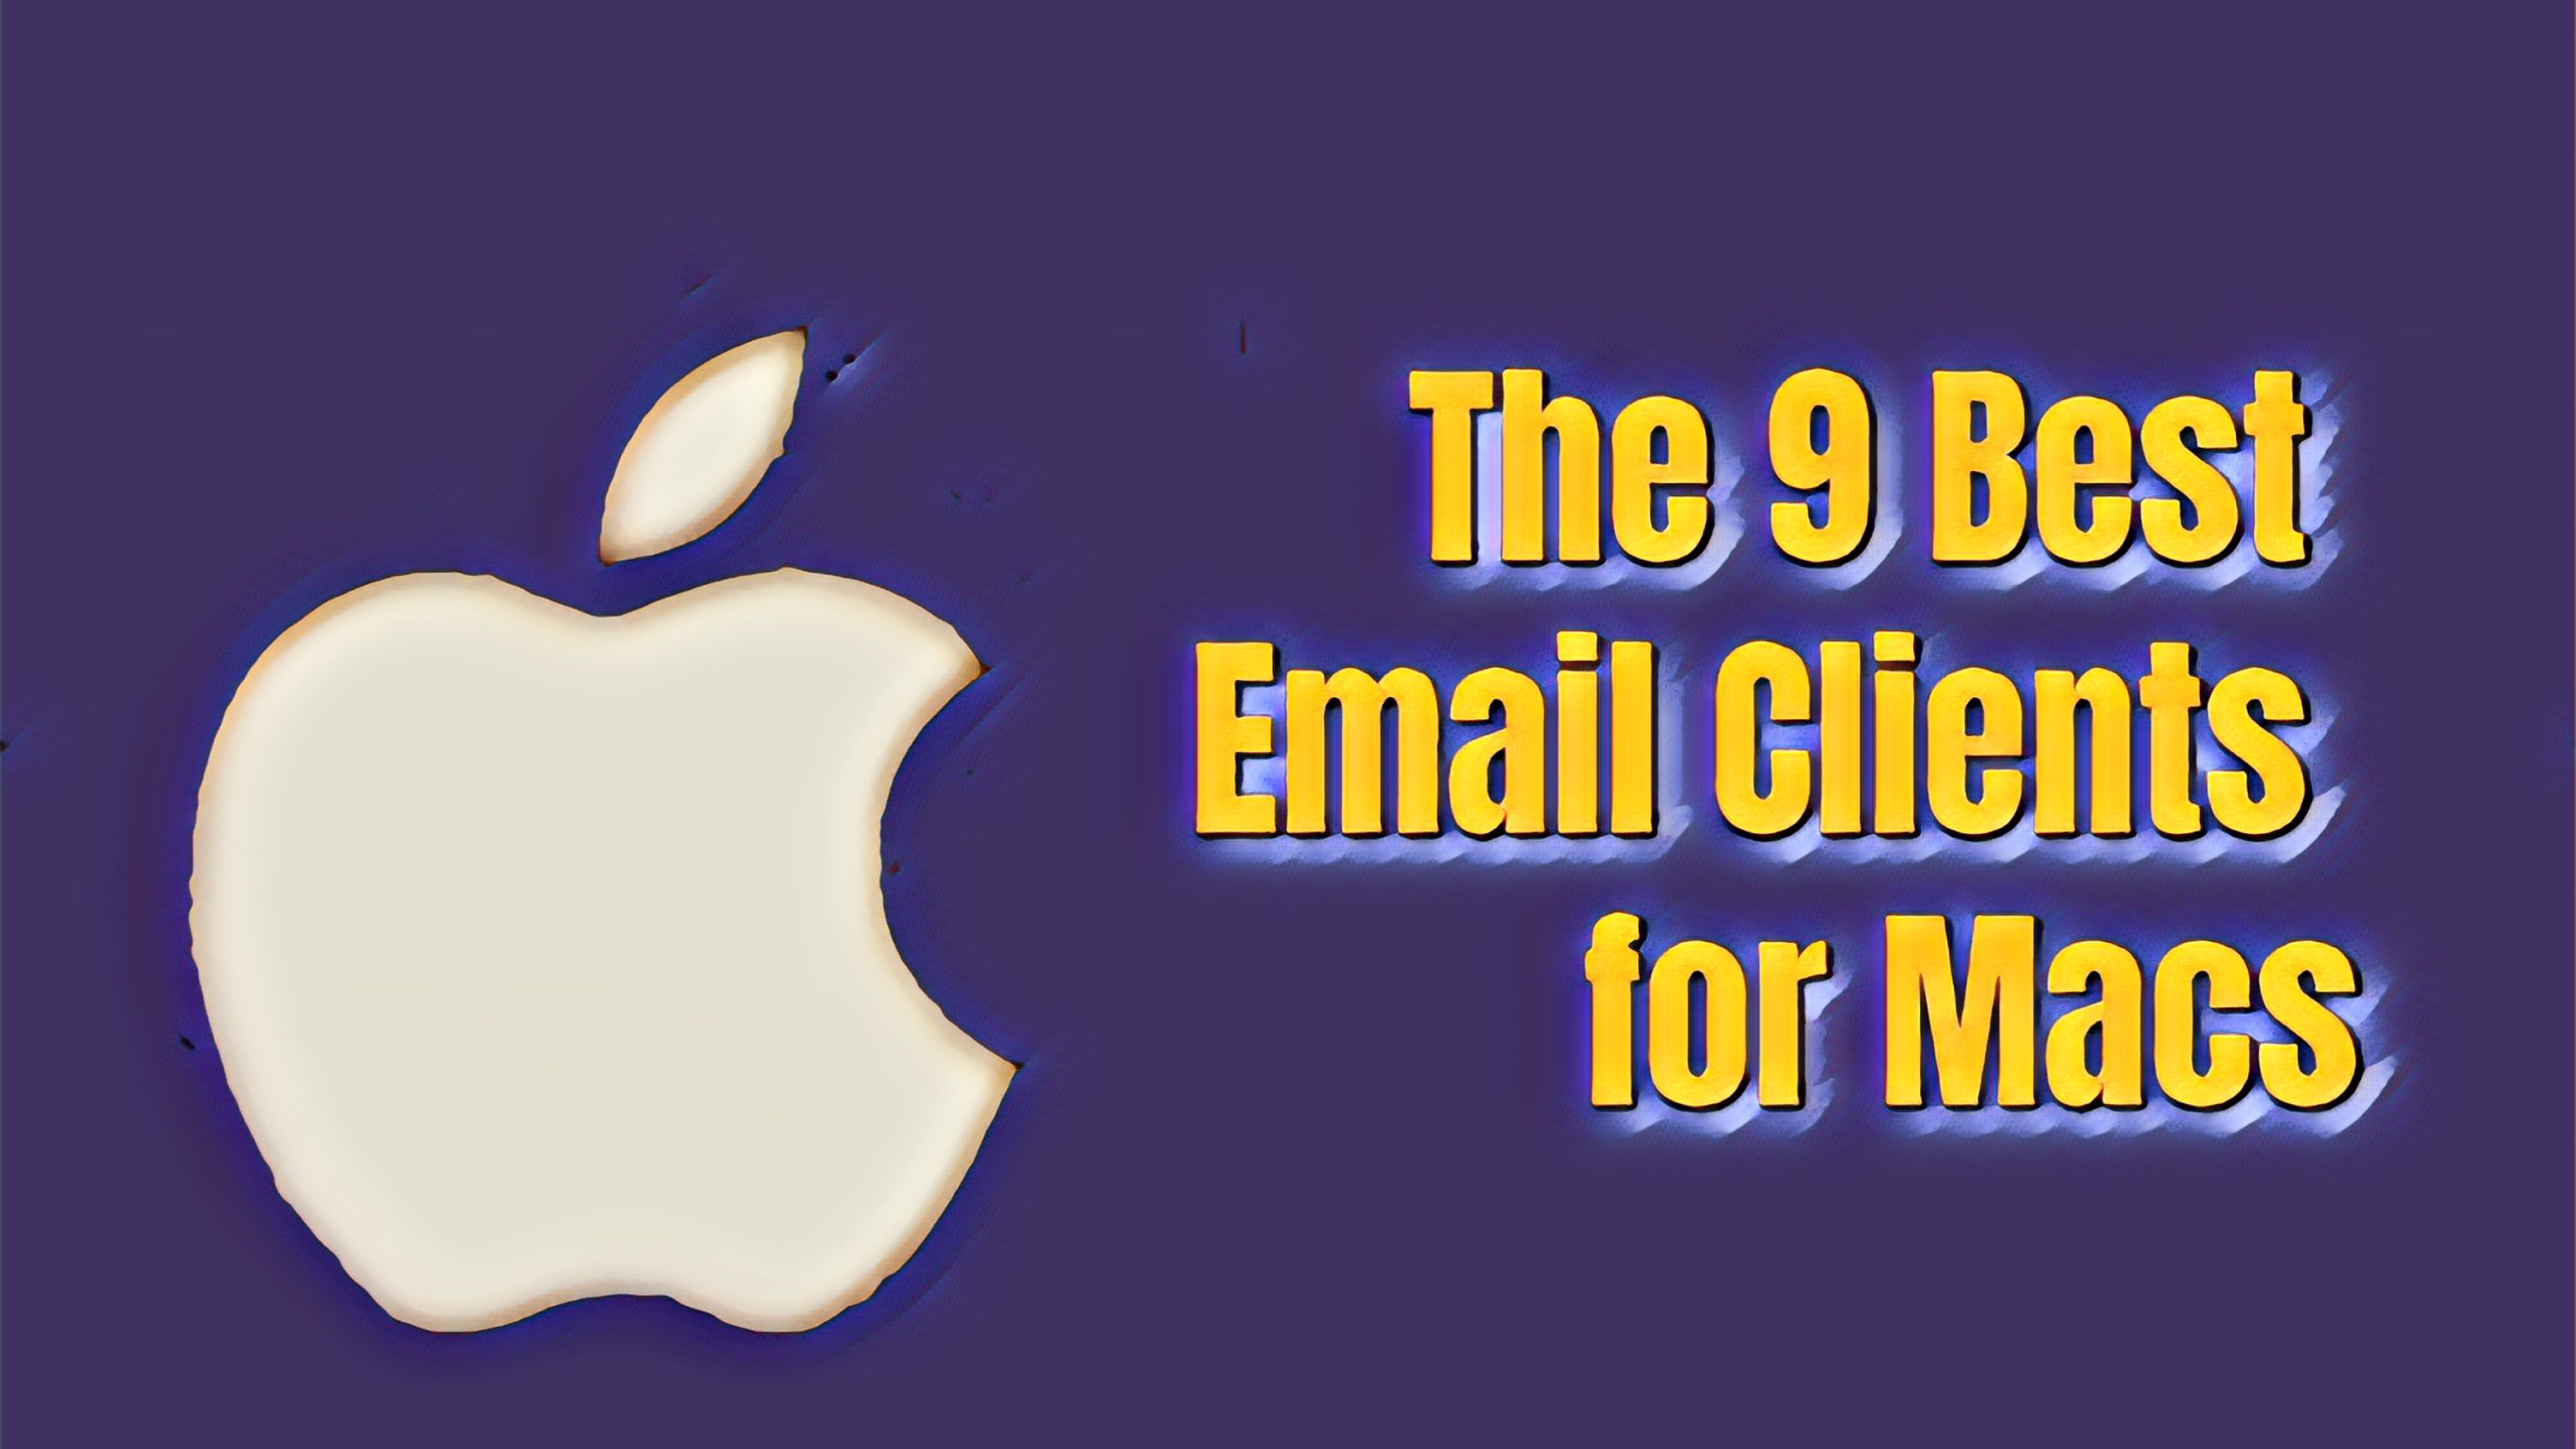 mac best email clients for 2017